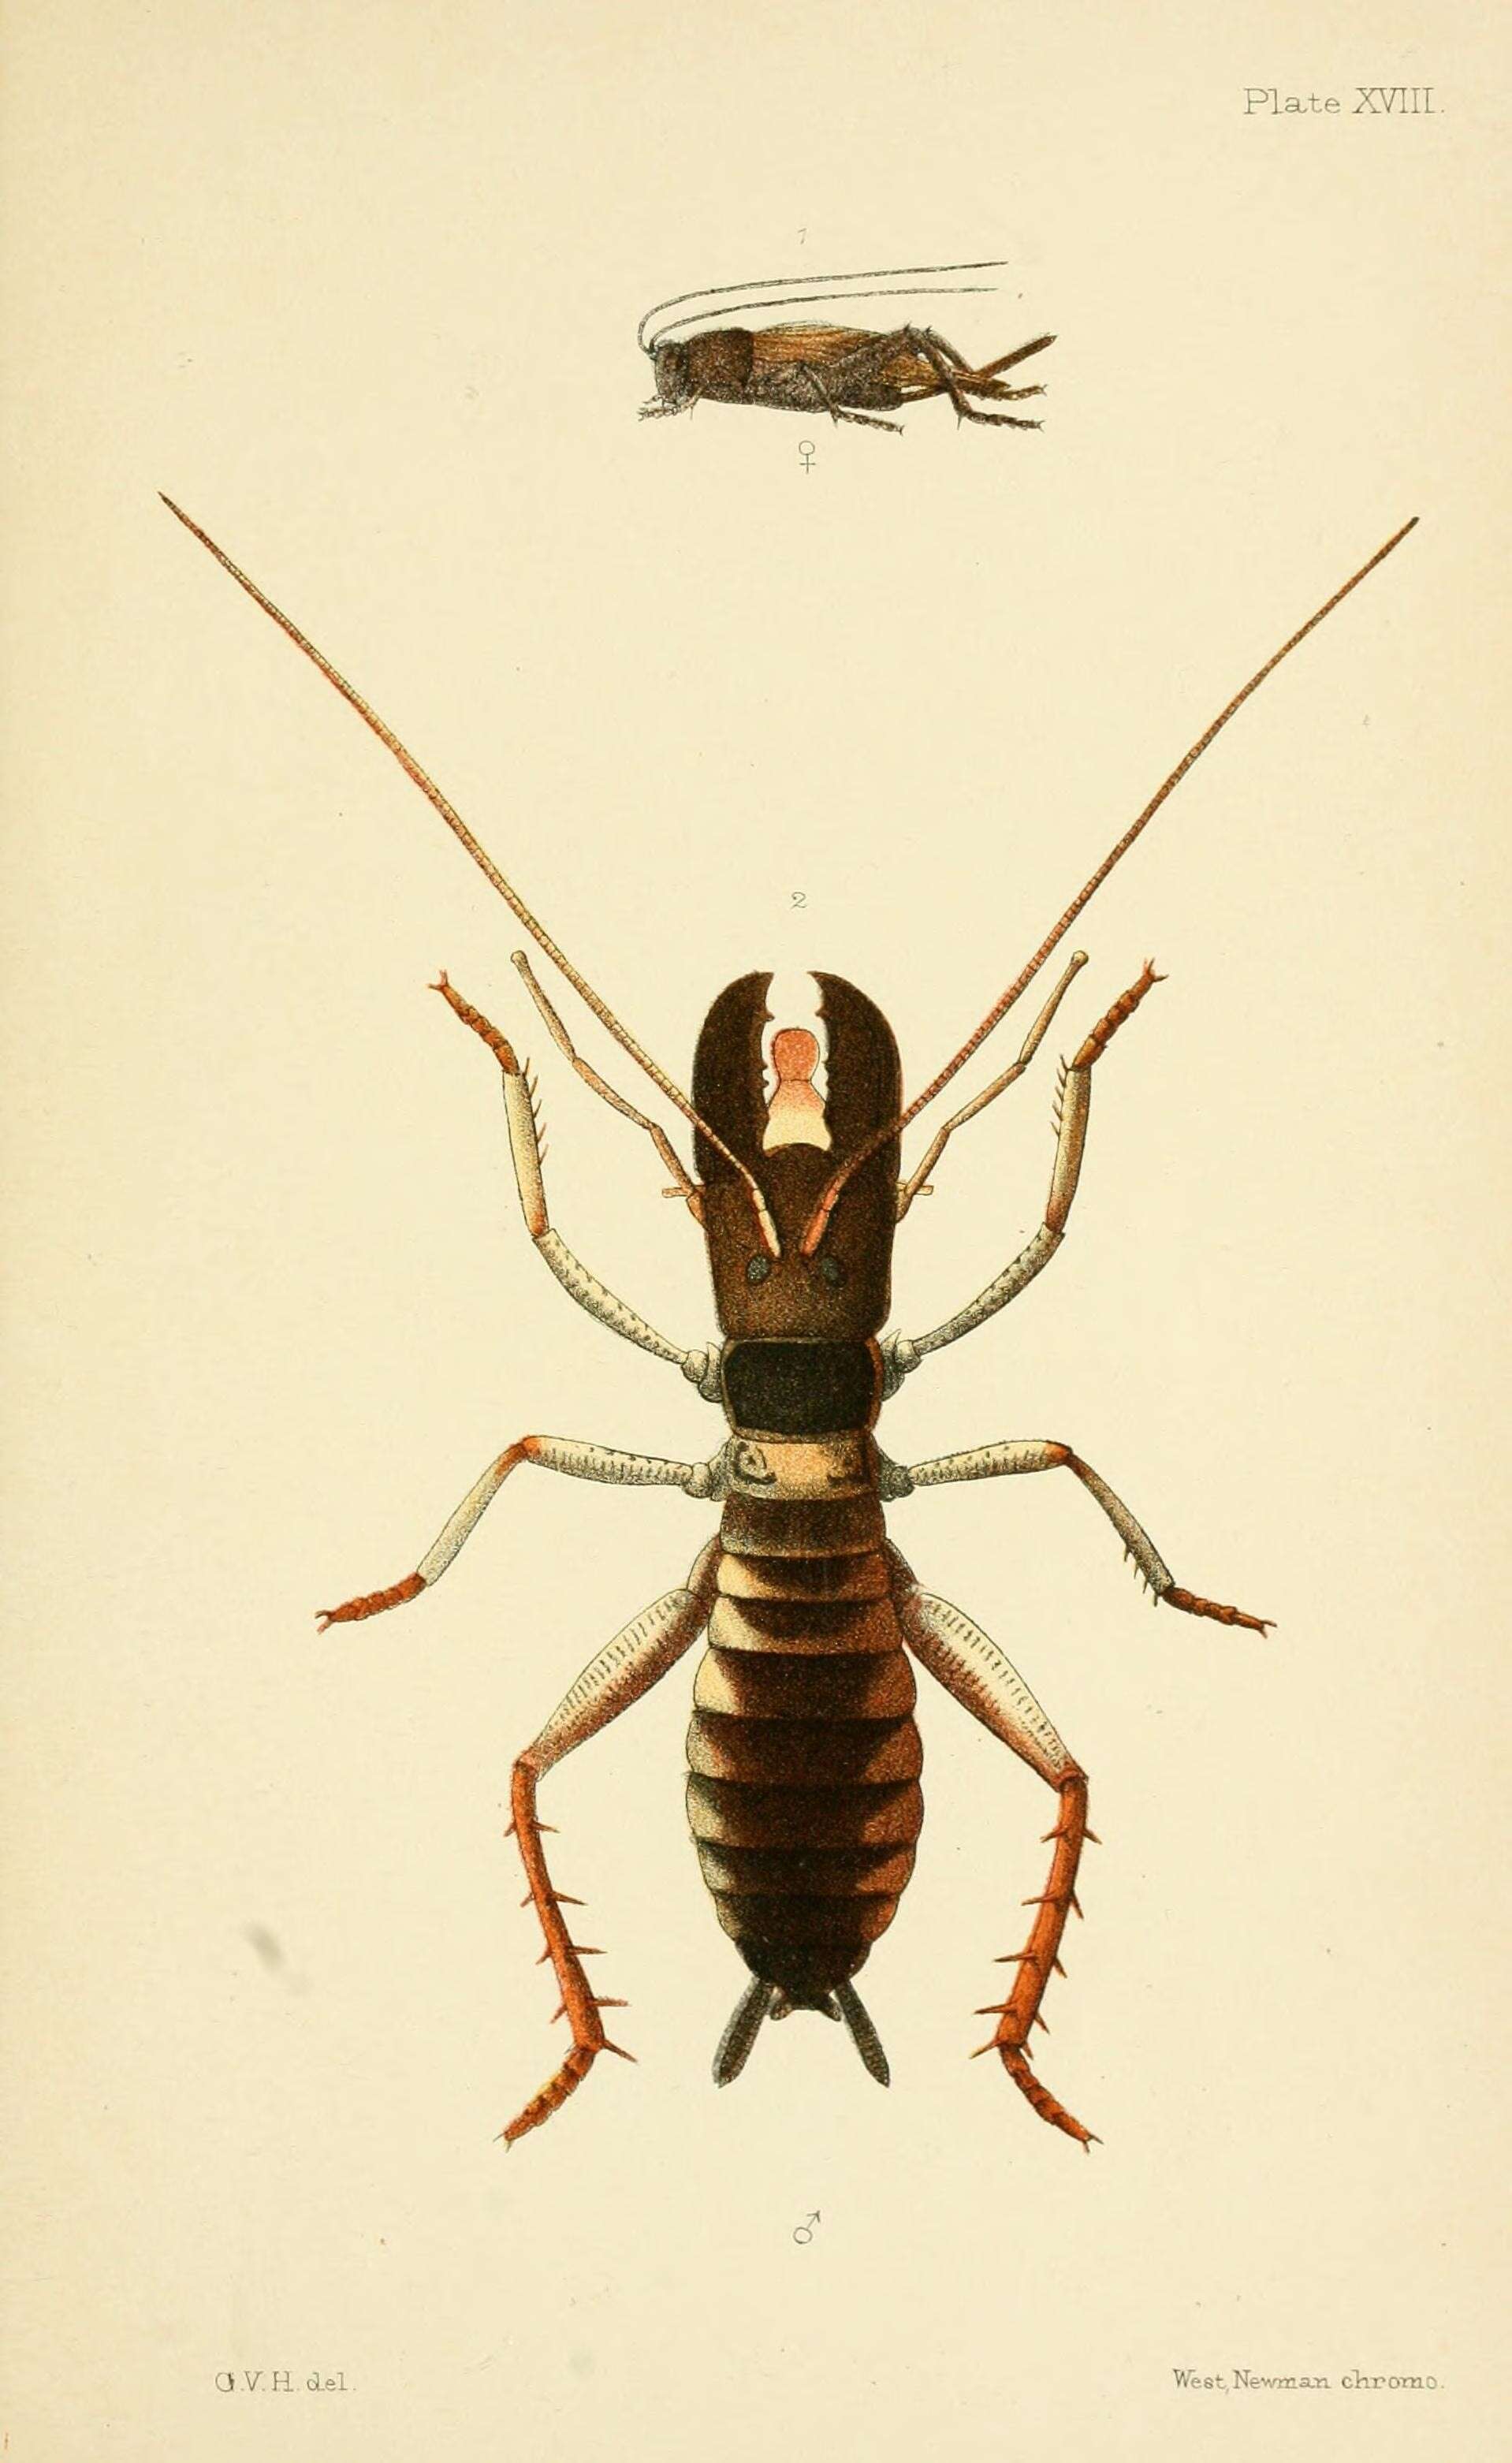 Image of wetas and king crickets